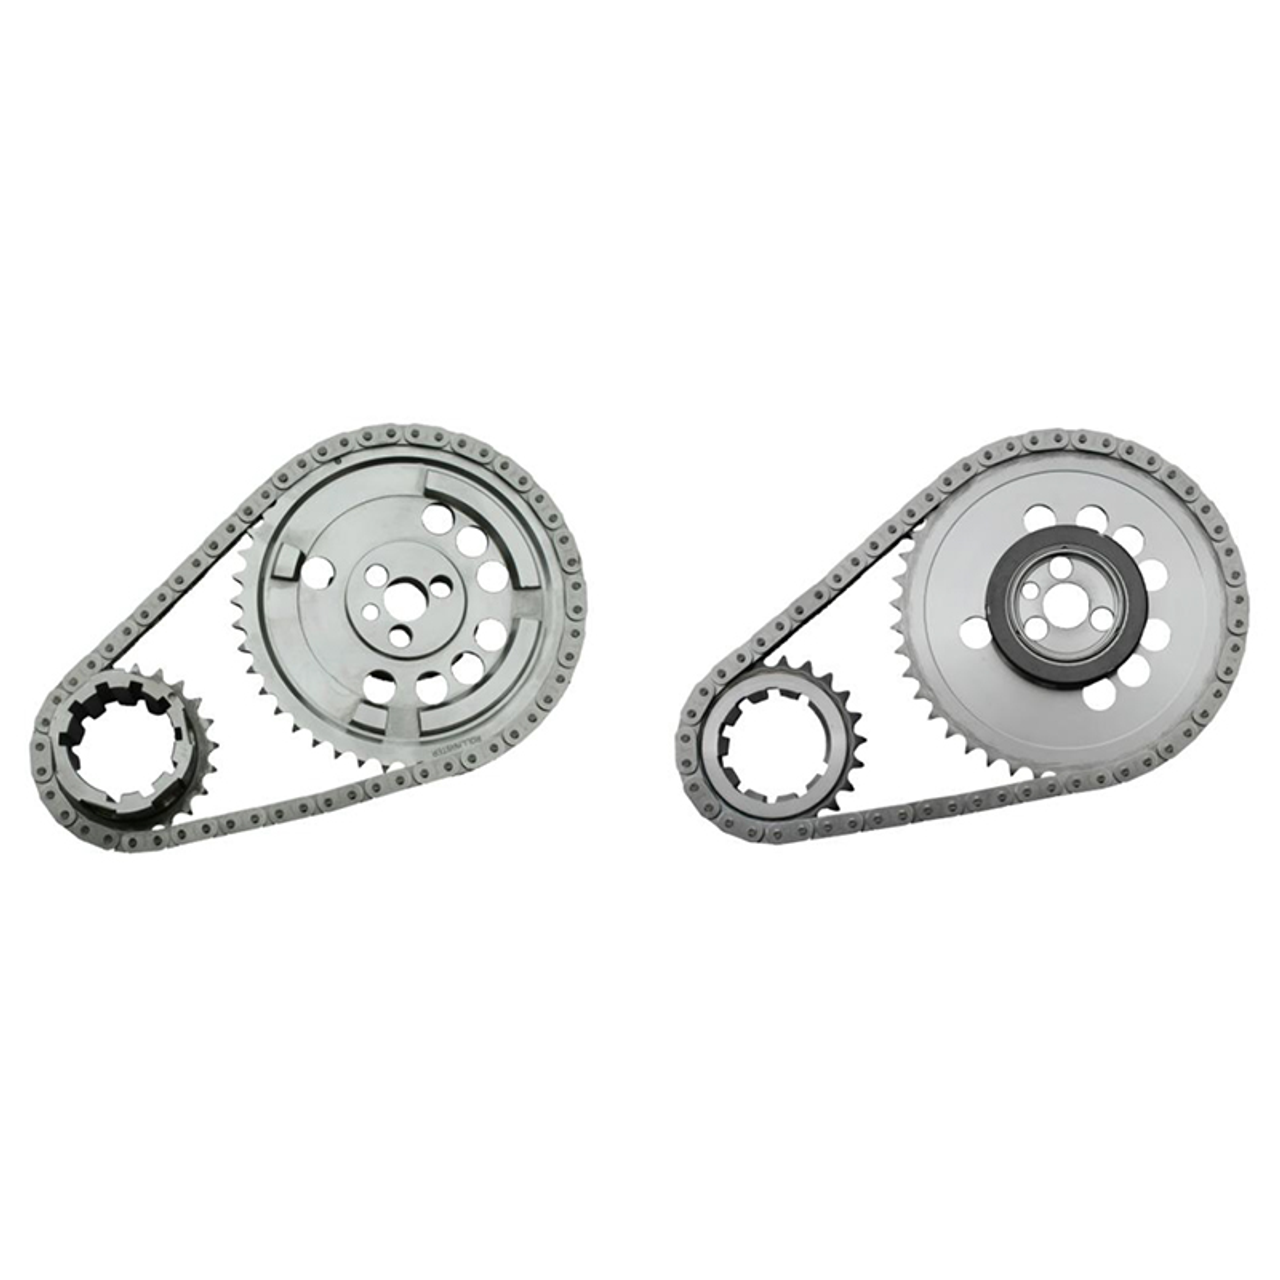 Rollmaster Double Row 4 Trigger Timing Chain Kit | Suits LSA